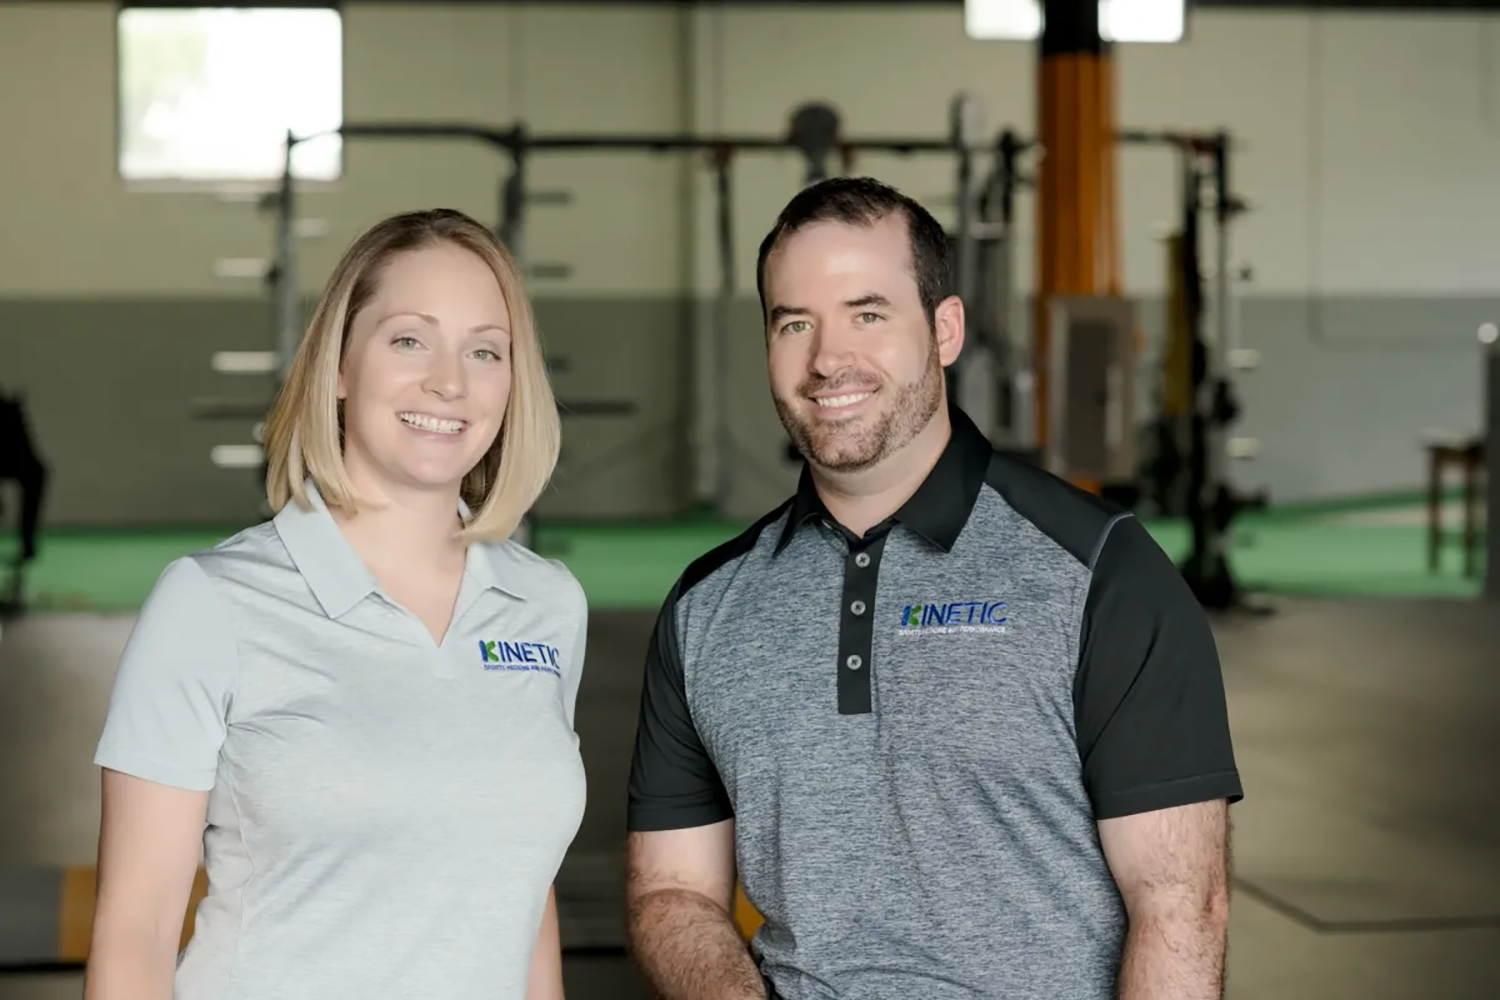 Delafield Physical Therapy - KINETIC Sports Medicine and Performance